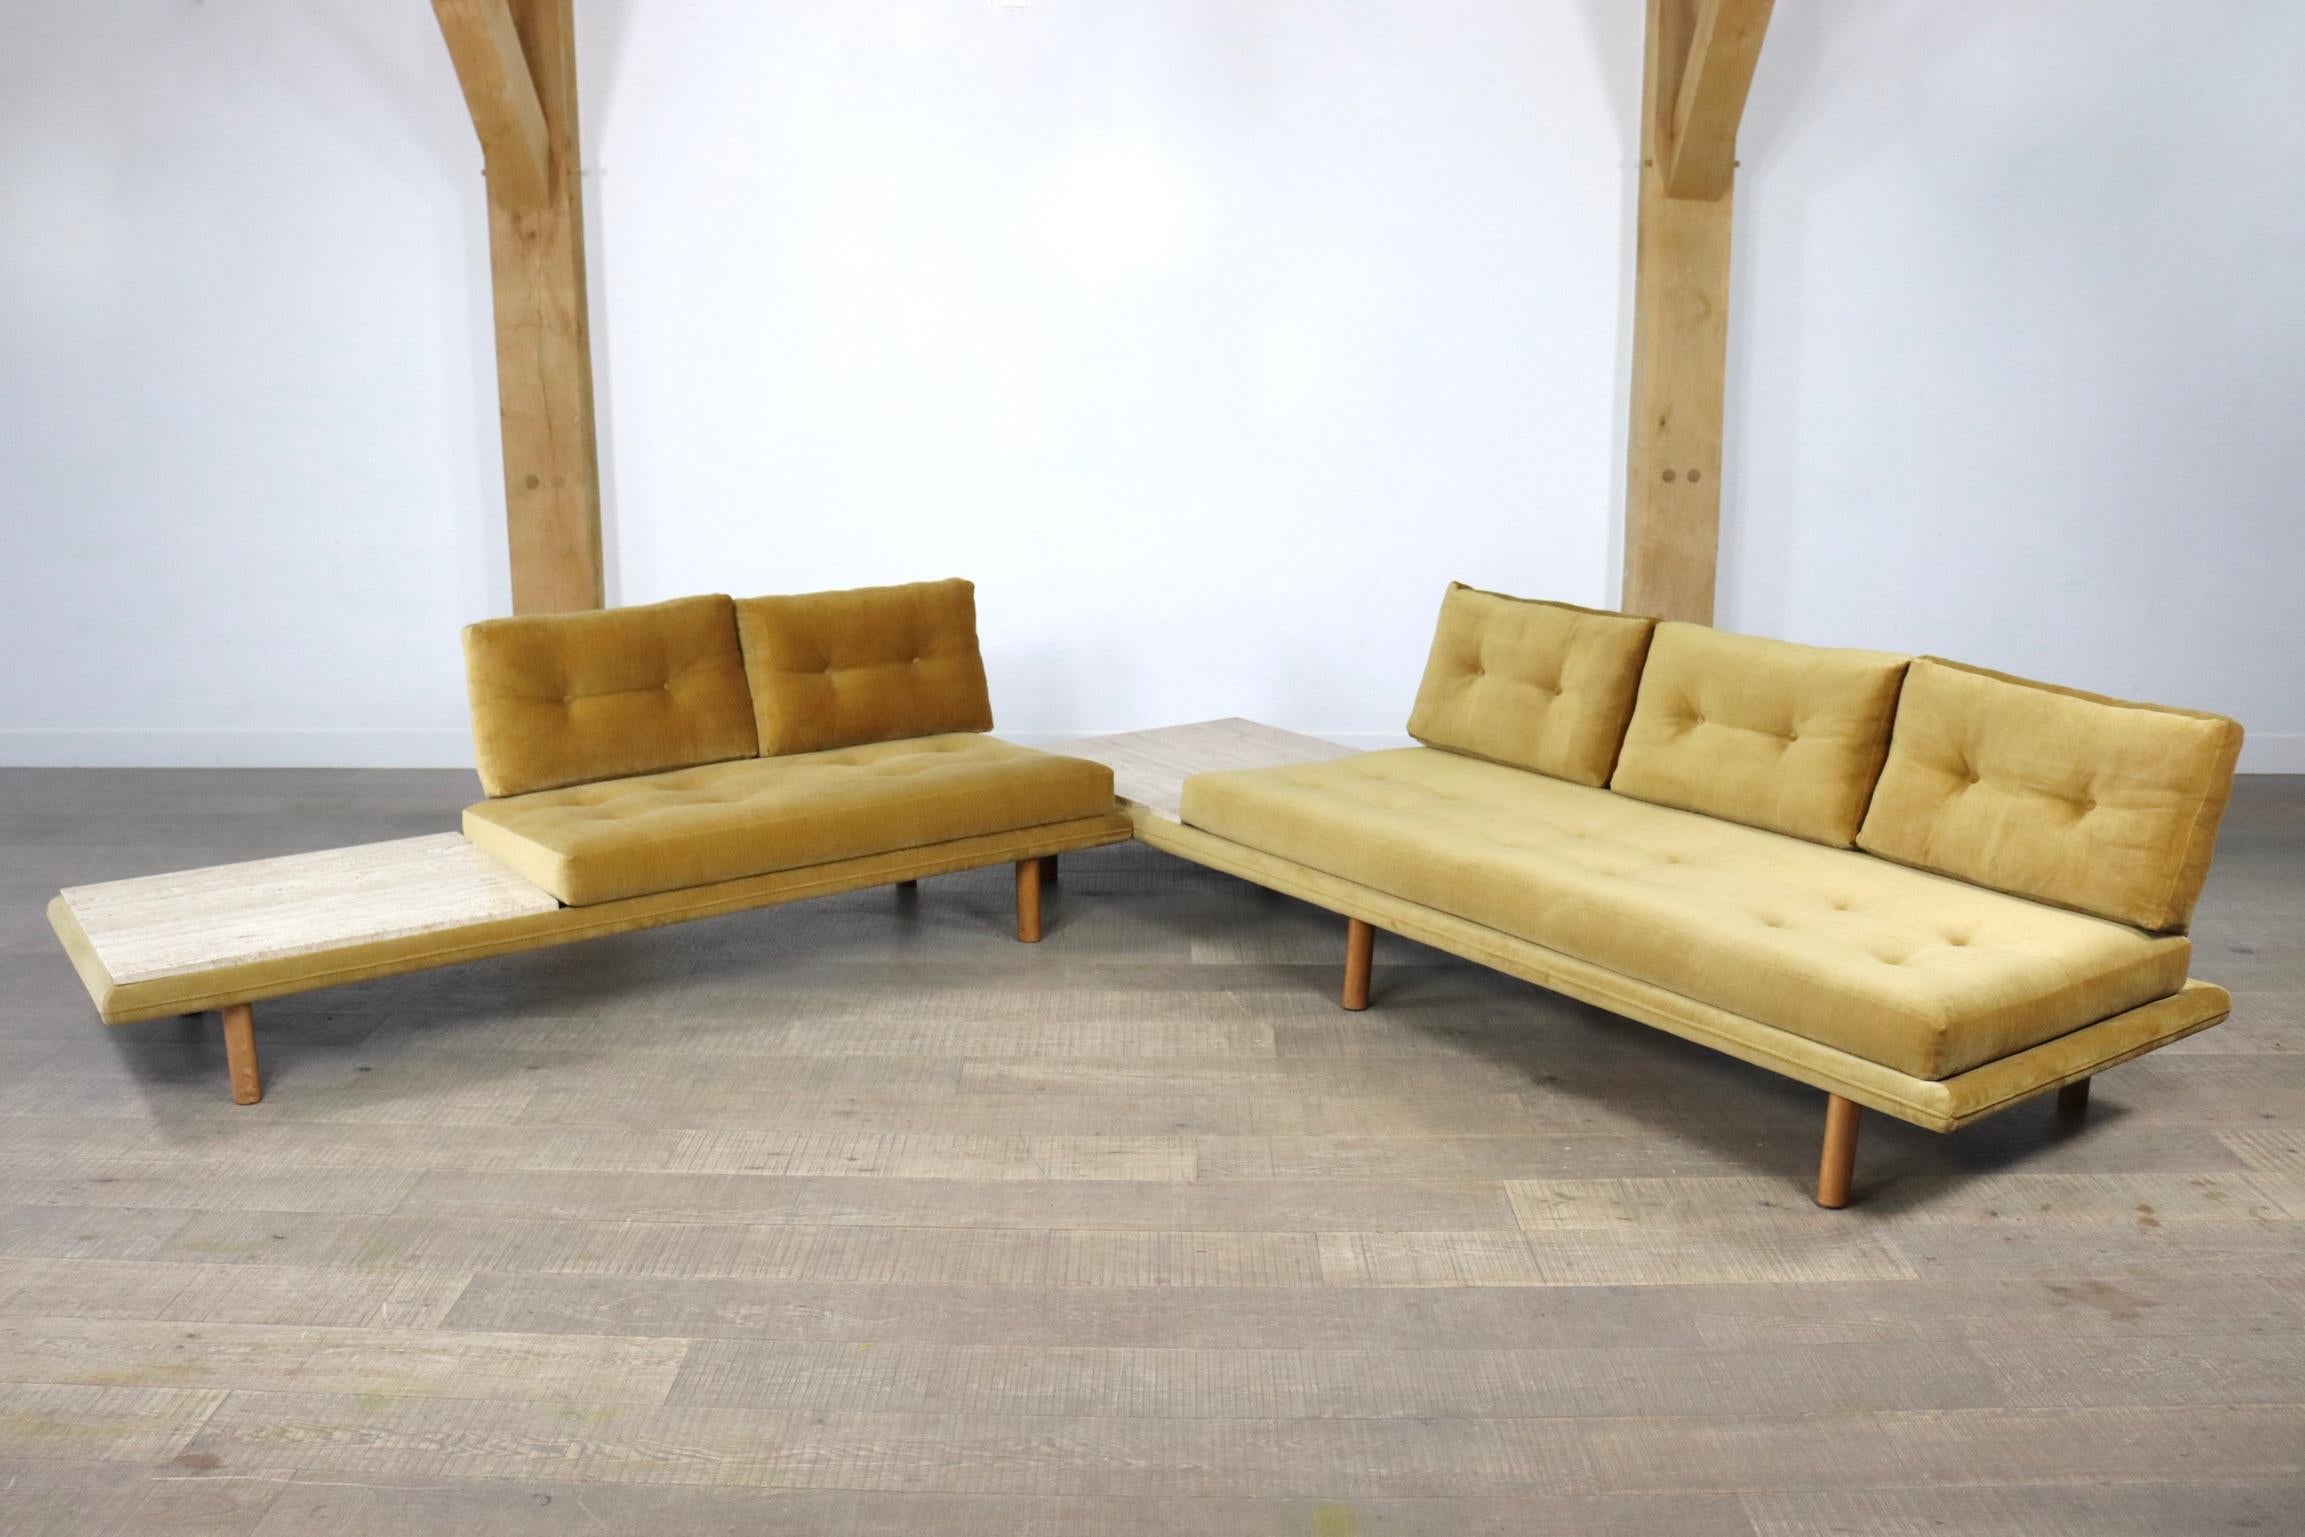 Incredible sofa / daybed model 6603 set by Franz Köttgen for Kill International, 1960s.
The set consists of a 3-seater sofa and a 2-seater sofa with original mustard velvet upholstery. Each sofa / daybed has a cream travertin coffeetable attached.